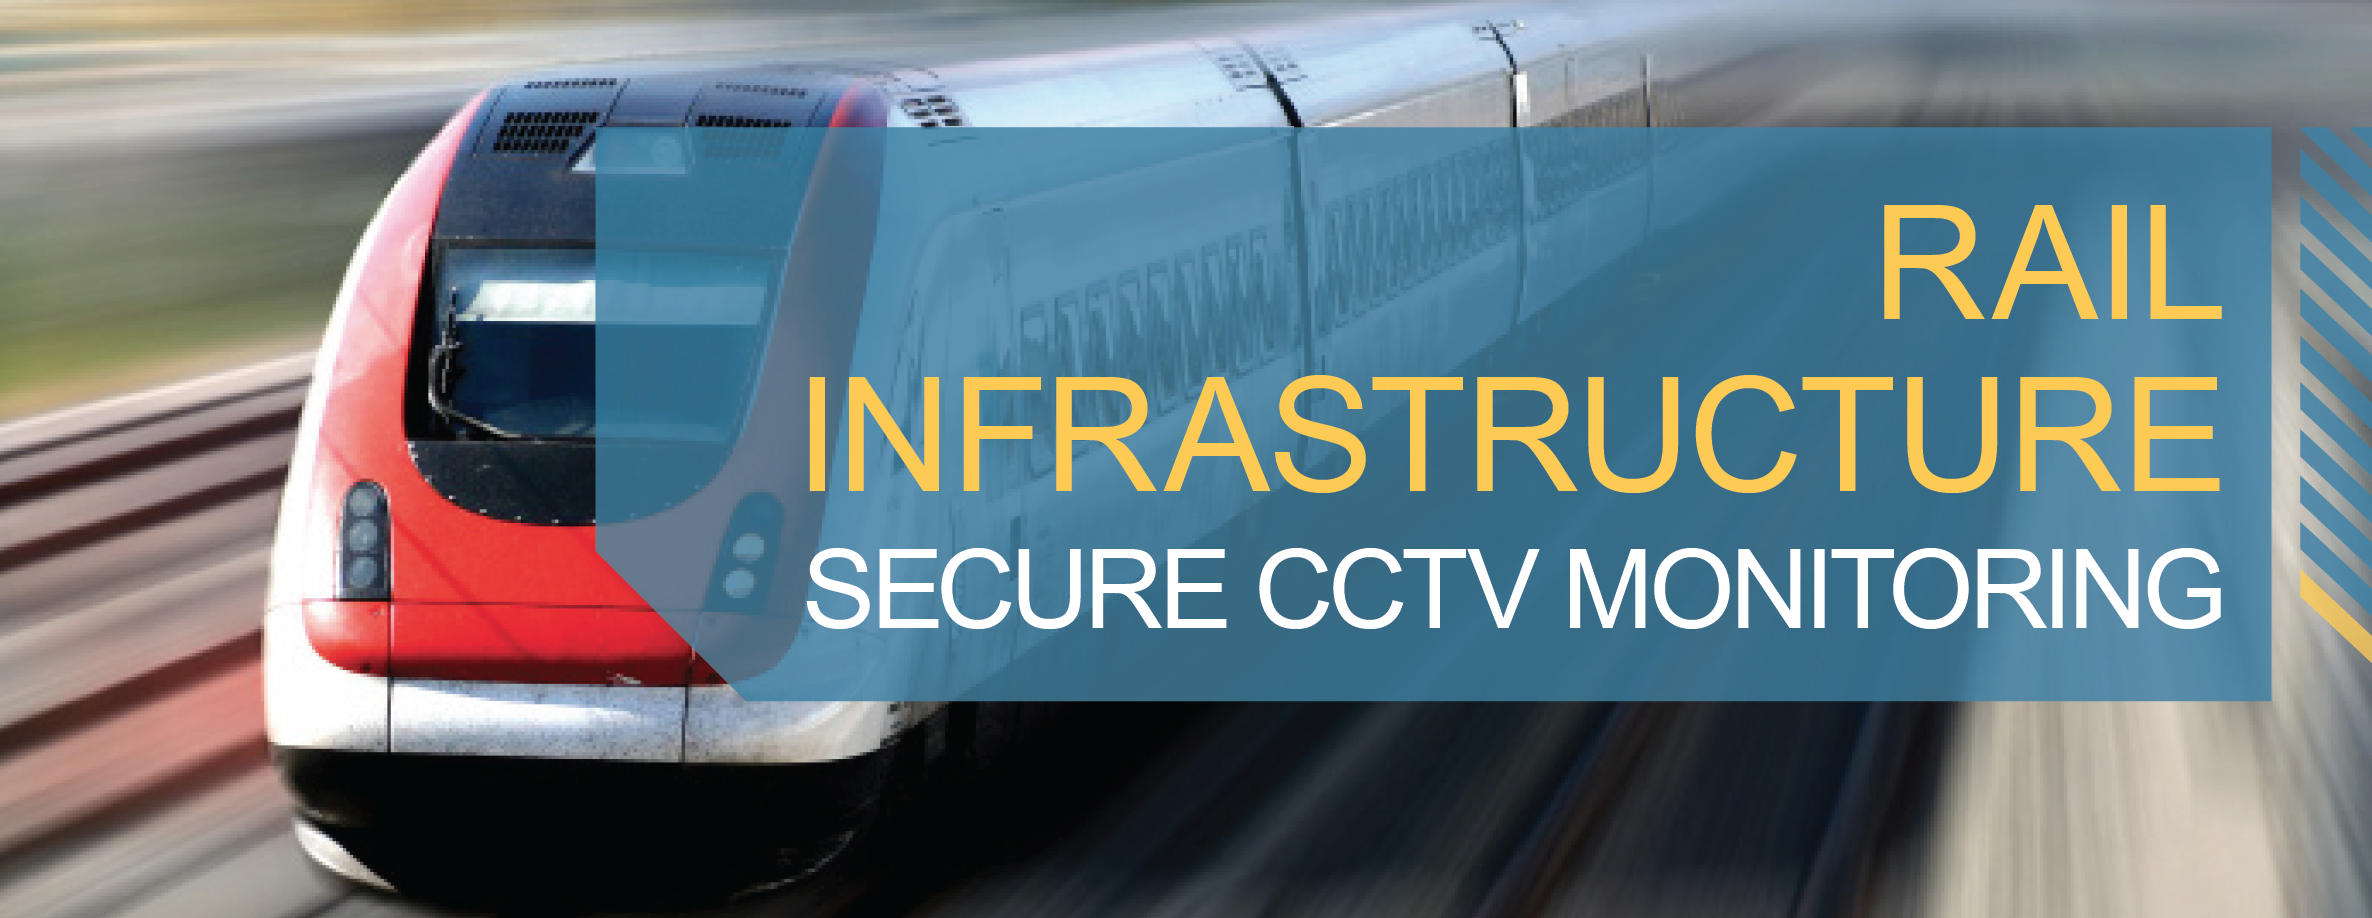 Rail infrastructure – secure CCTV monitoring 